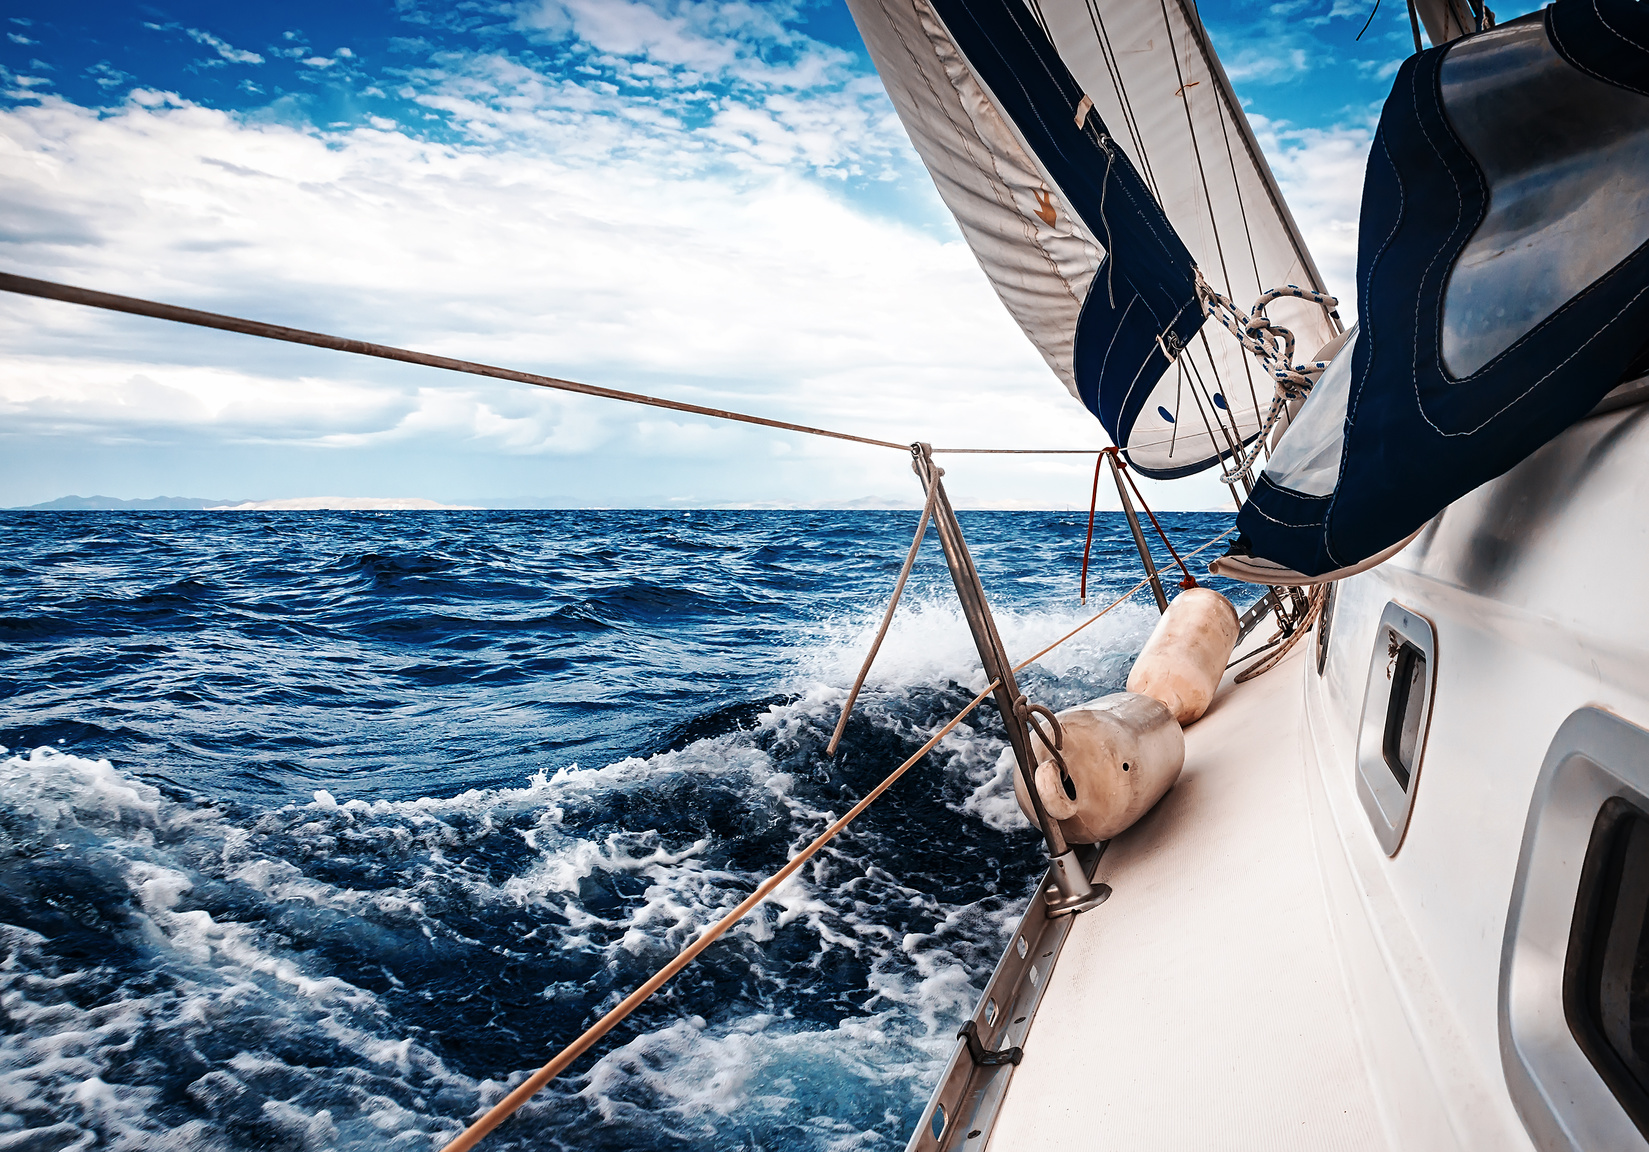 Let's Cross The Atlantic, Why Not? | SailingEurope Blog